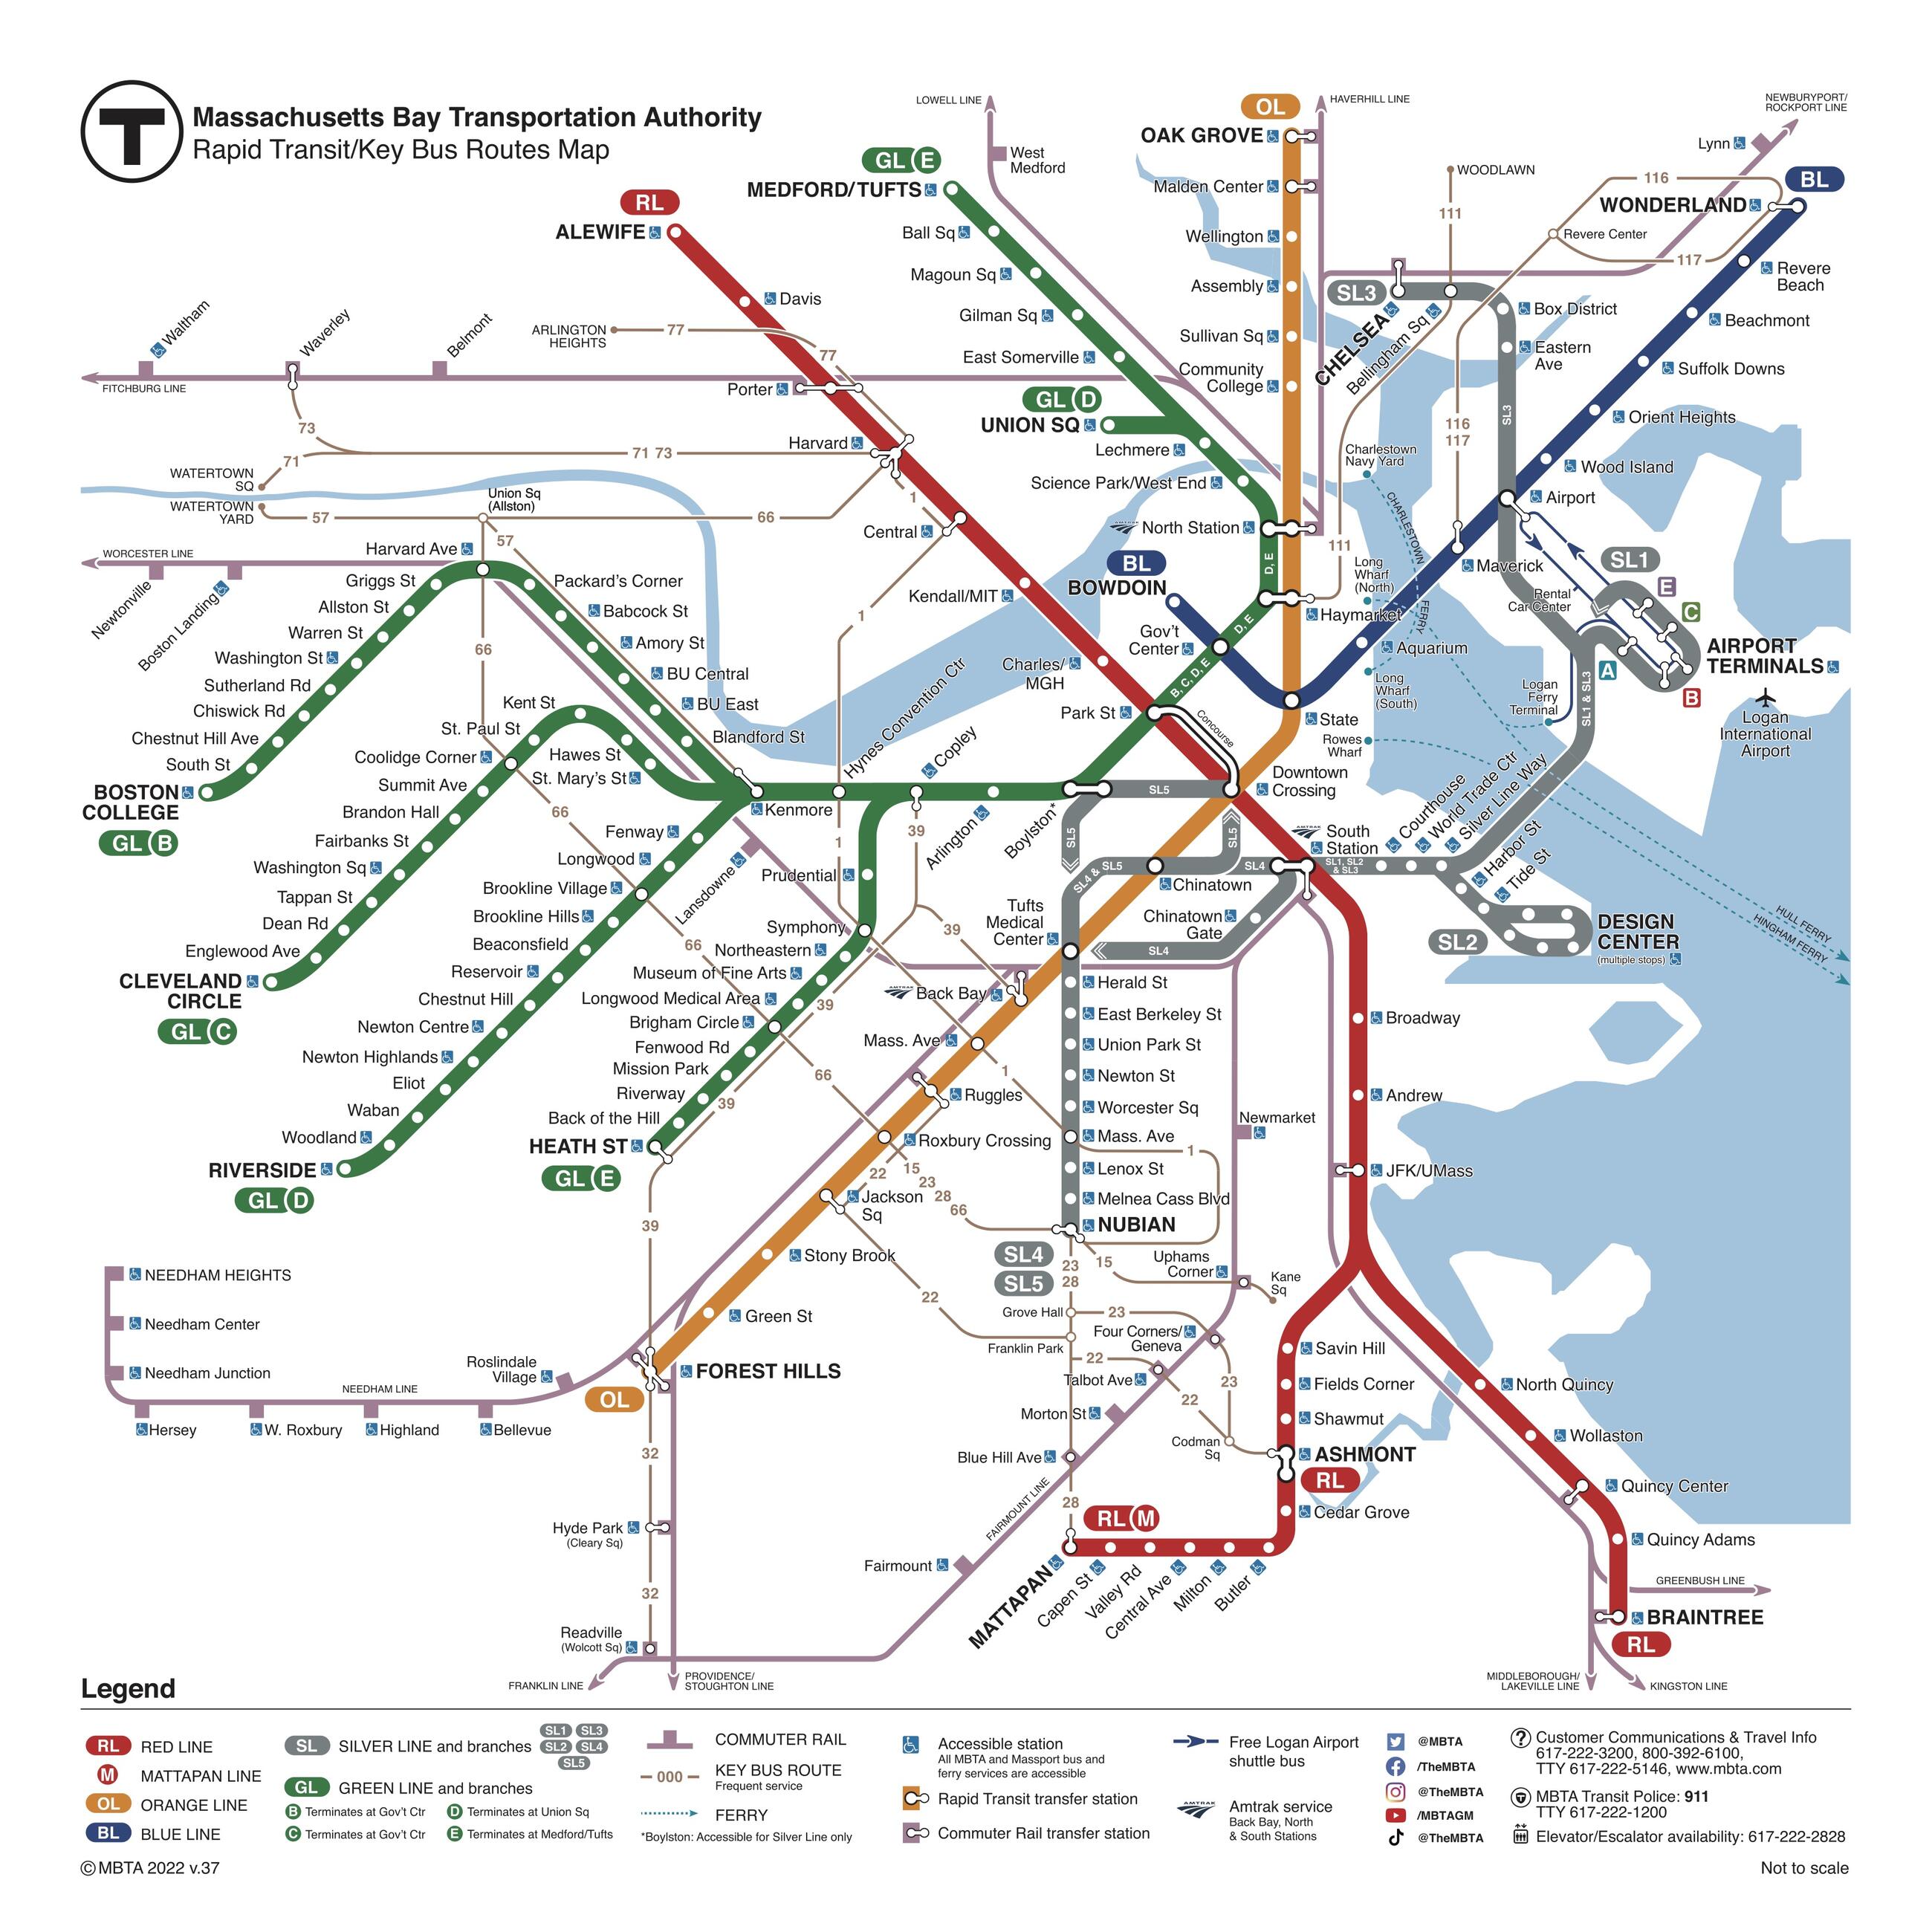 Subway map, rapid transit and key bus routes